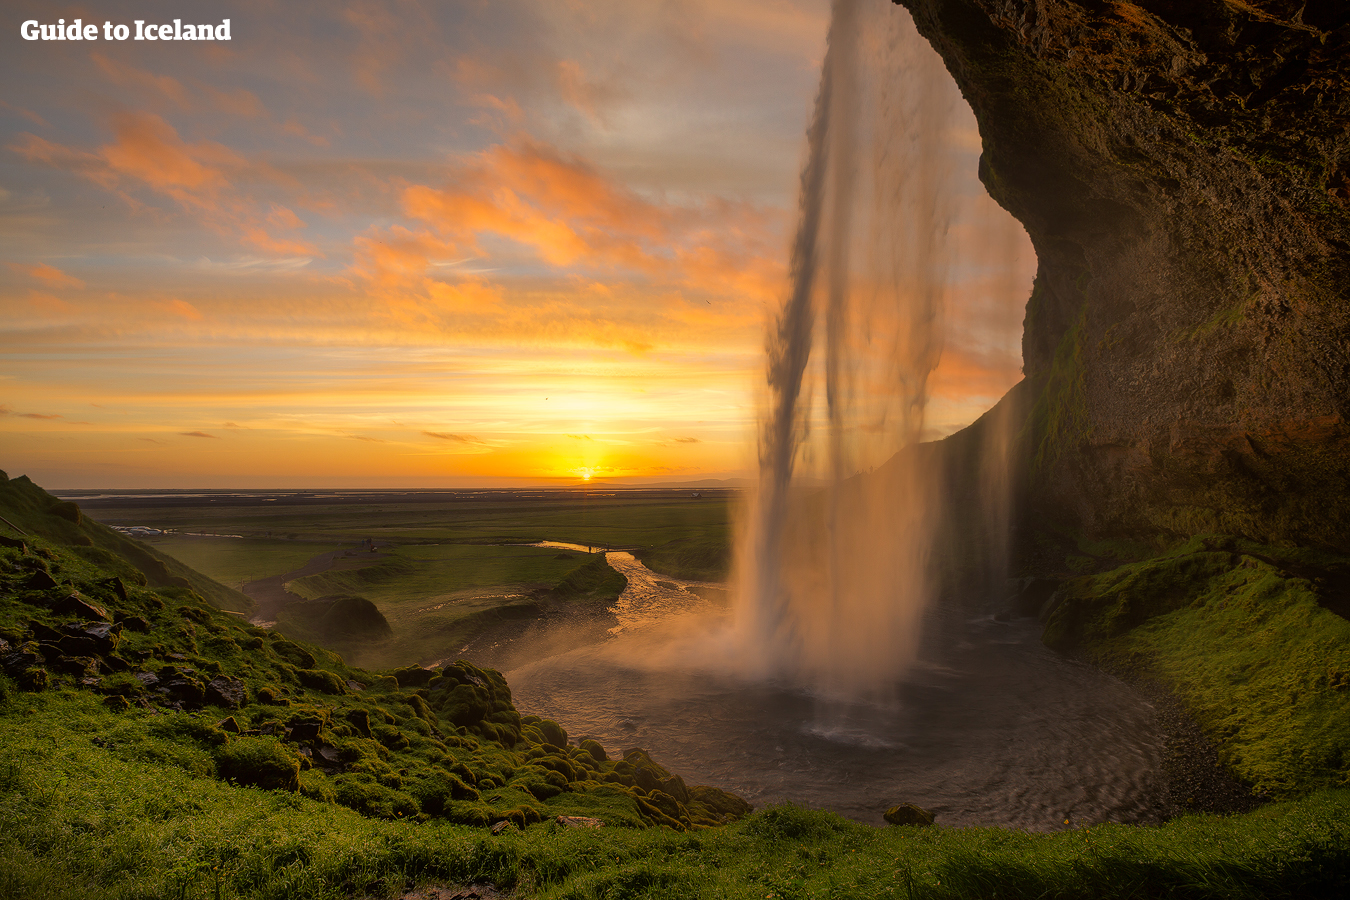 Seljalandsfoss, along with Skógafoss, is one of the major highlights of South Coast sightseeing tours.